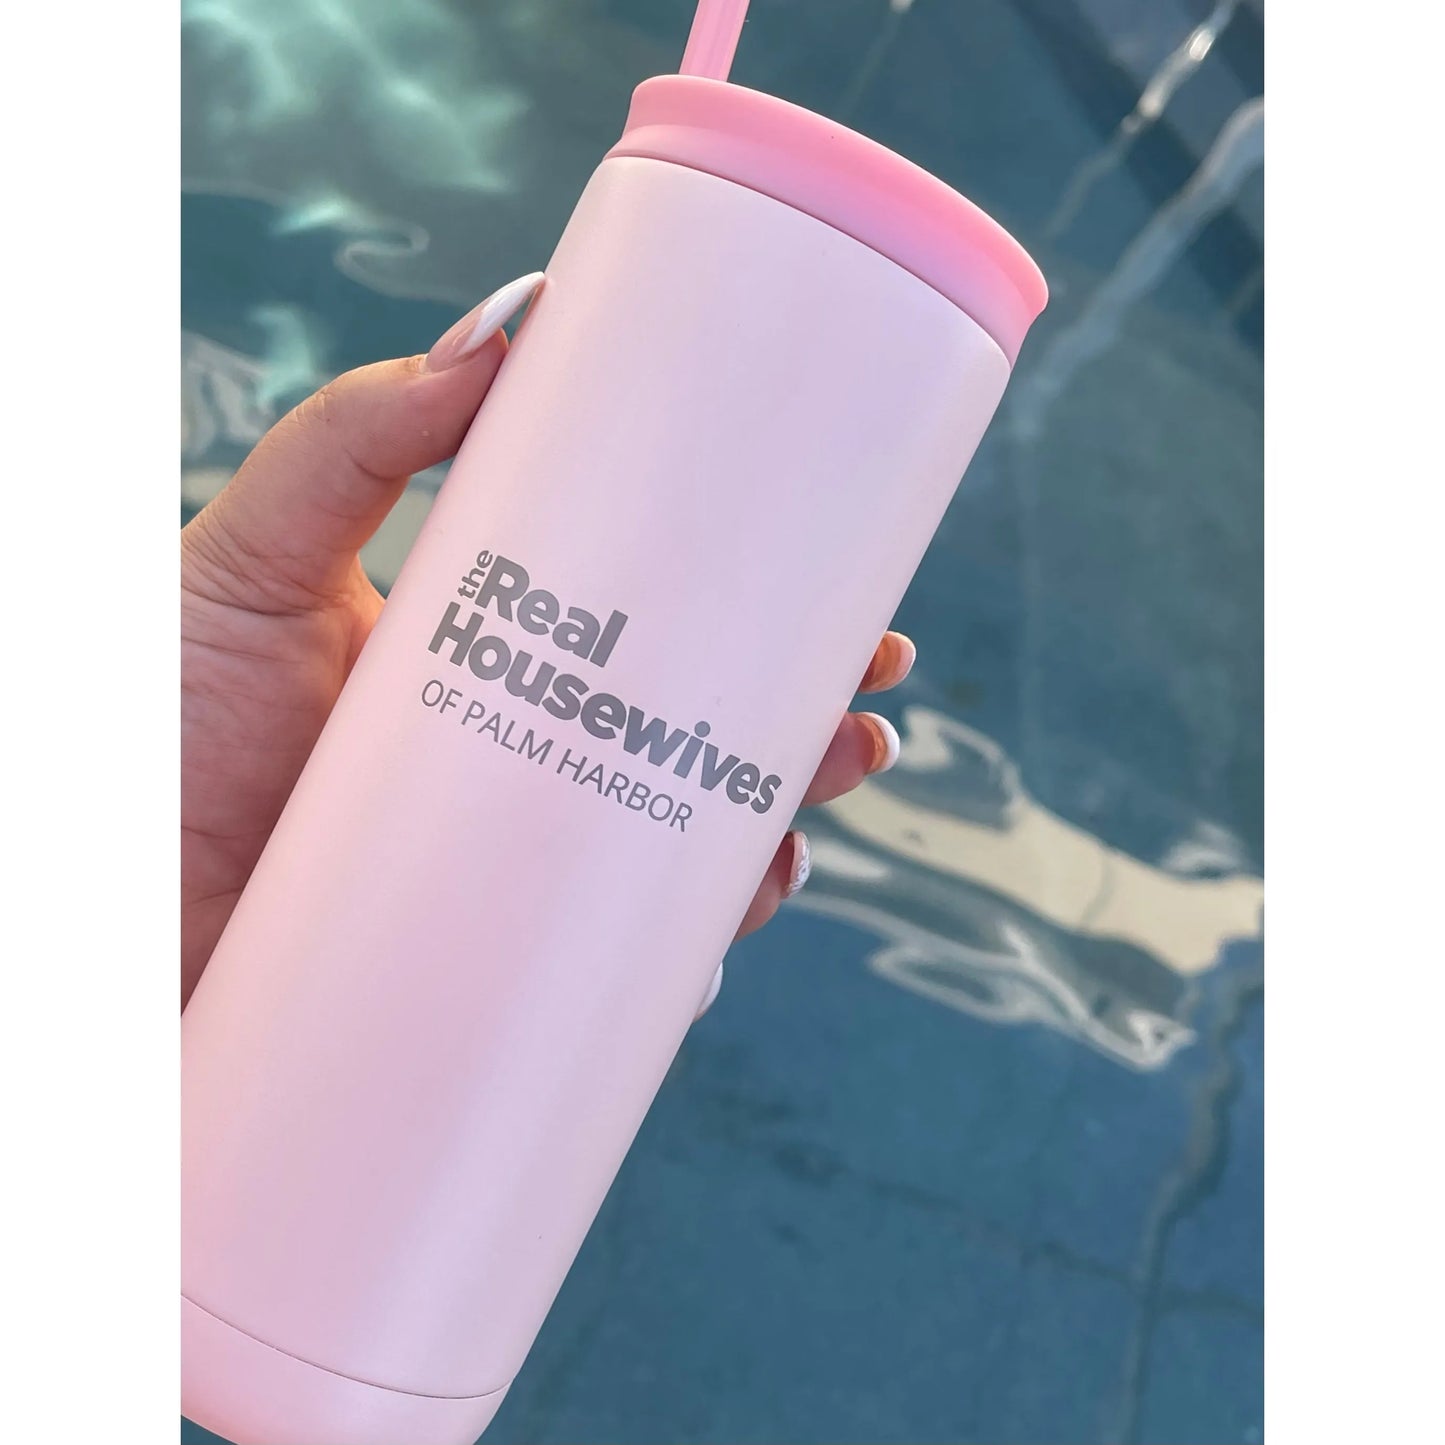 Real Housewives Light pink tumbler